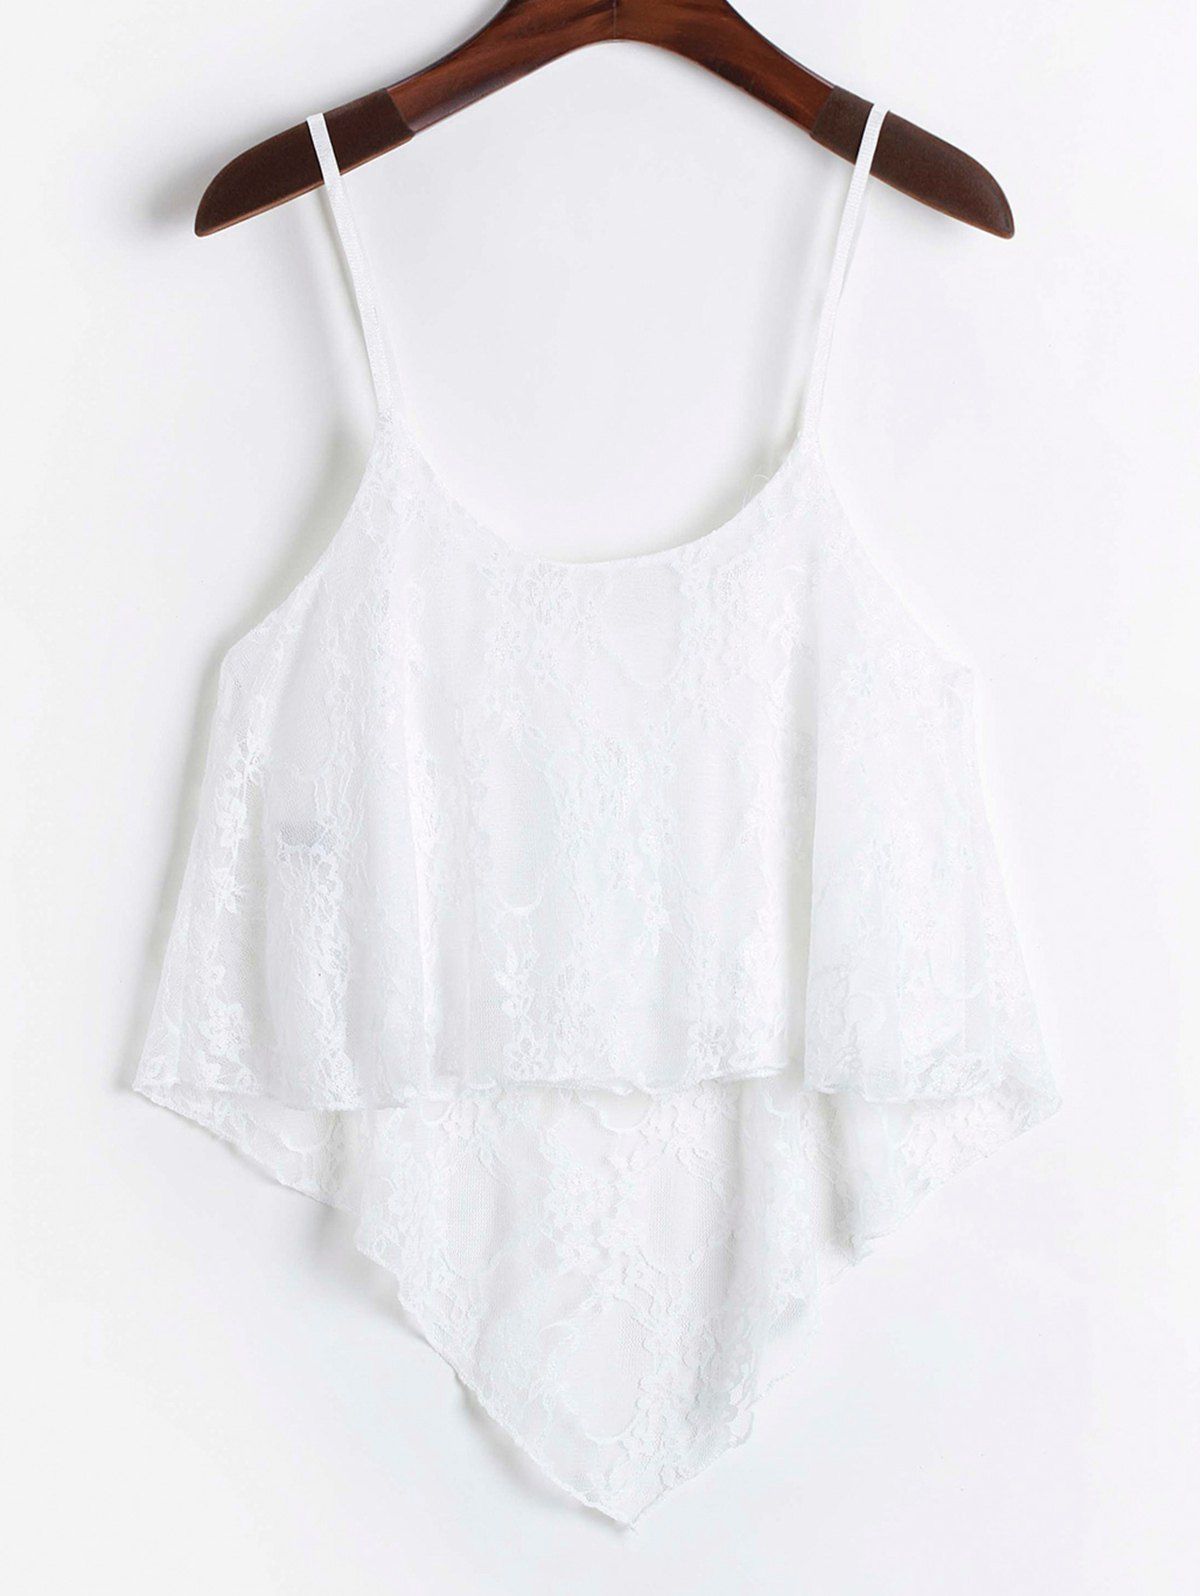 [29% OFF] Stylish Spaghetti Strap Sleeveless White Lace Tank Top For ...